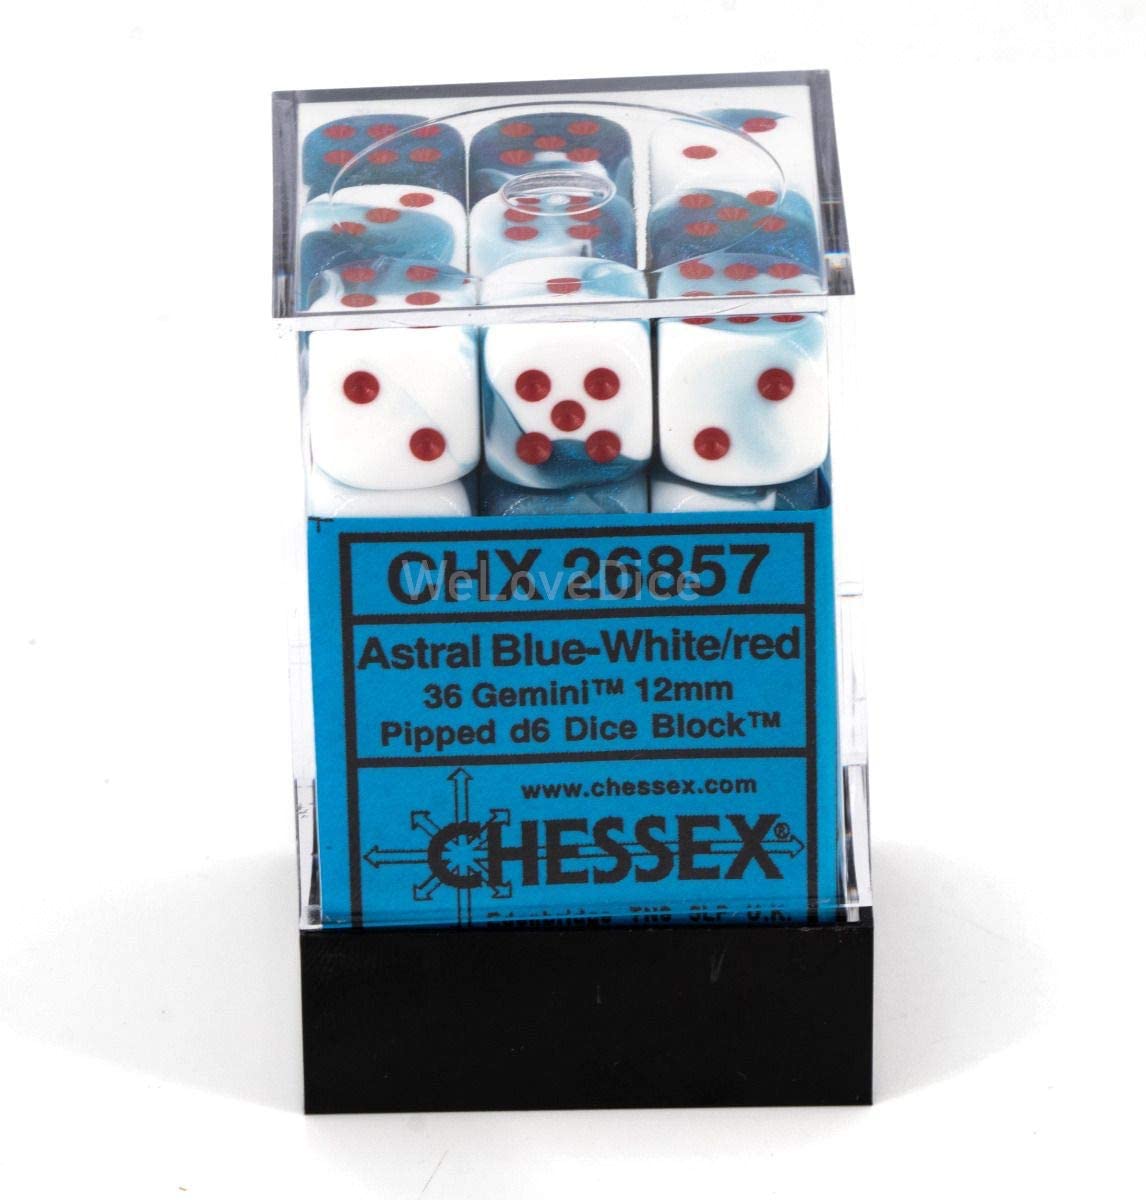 Chessex Dice: D6 Block 12mm - Gemini - Astral Blue-White with Red (CHX 26857) - Gamescape